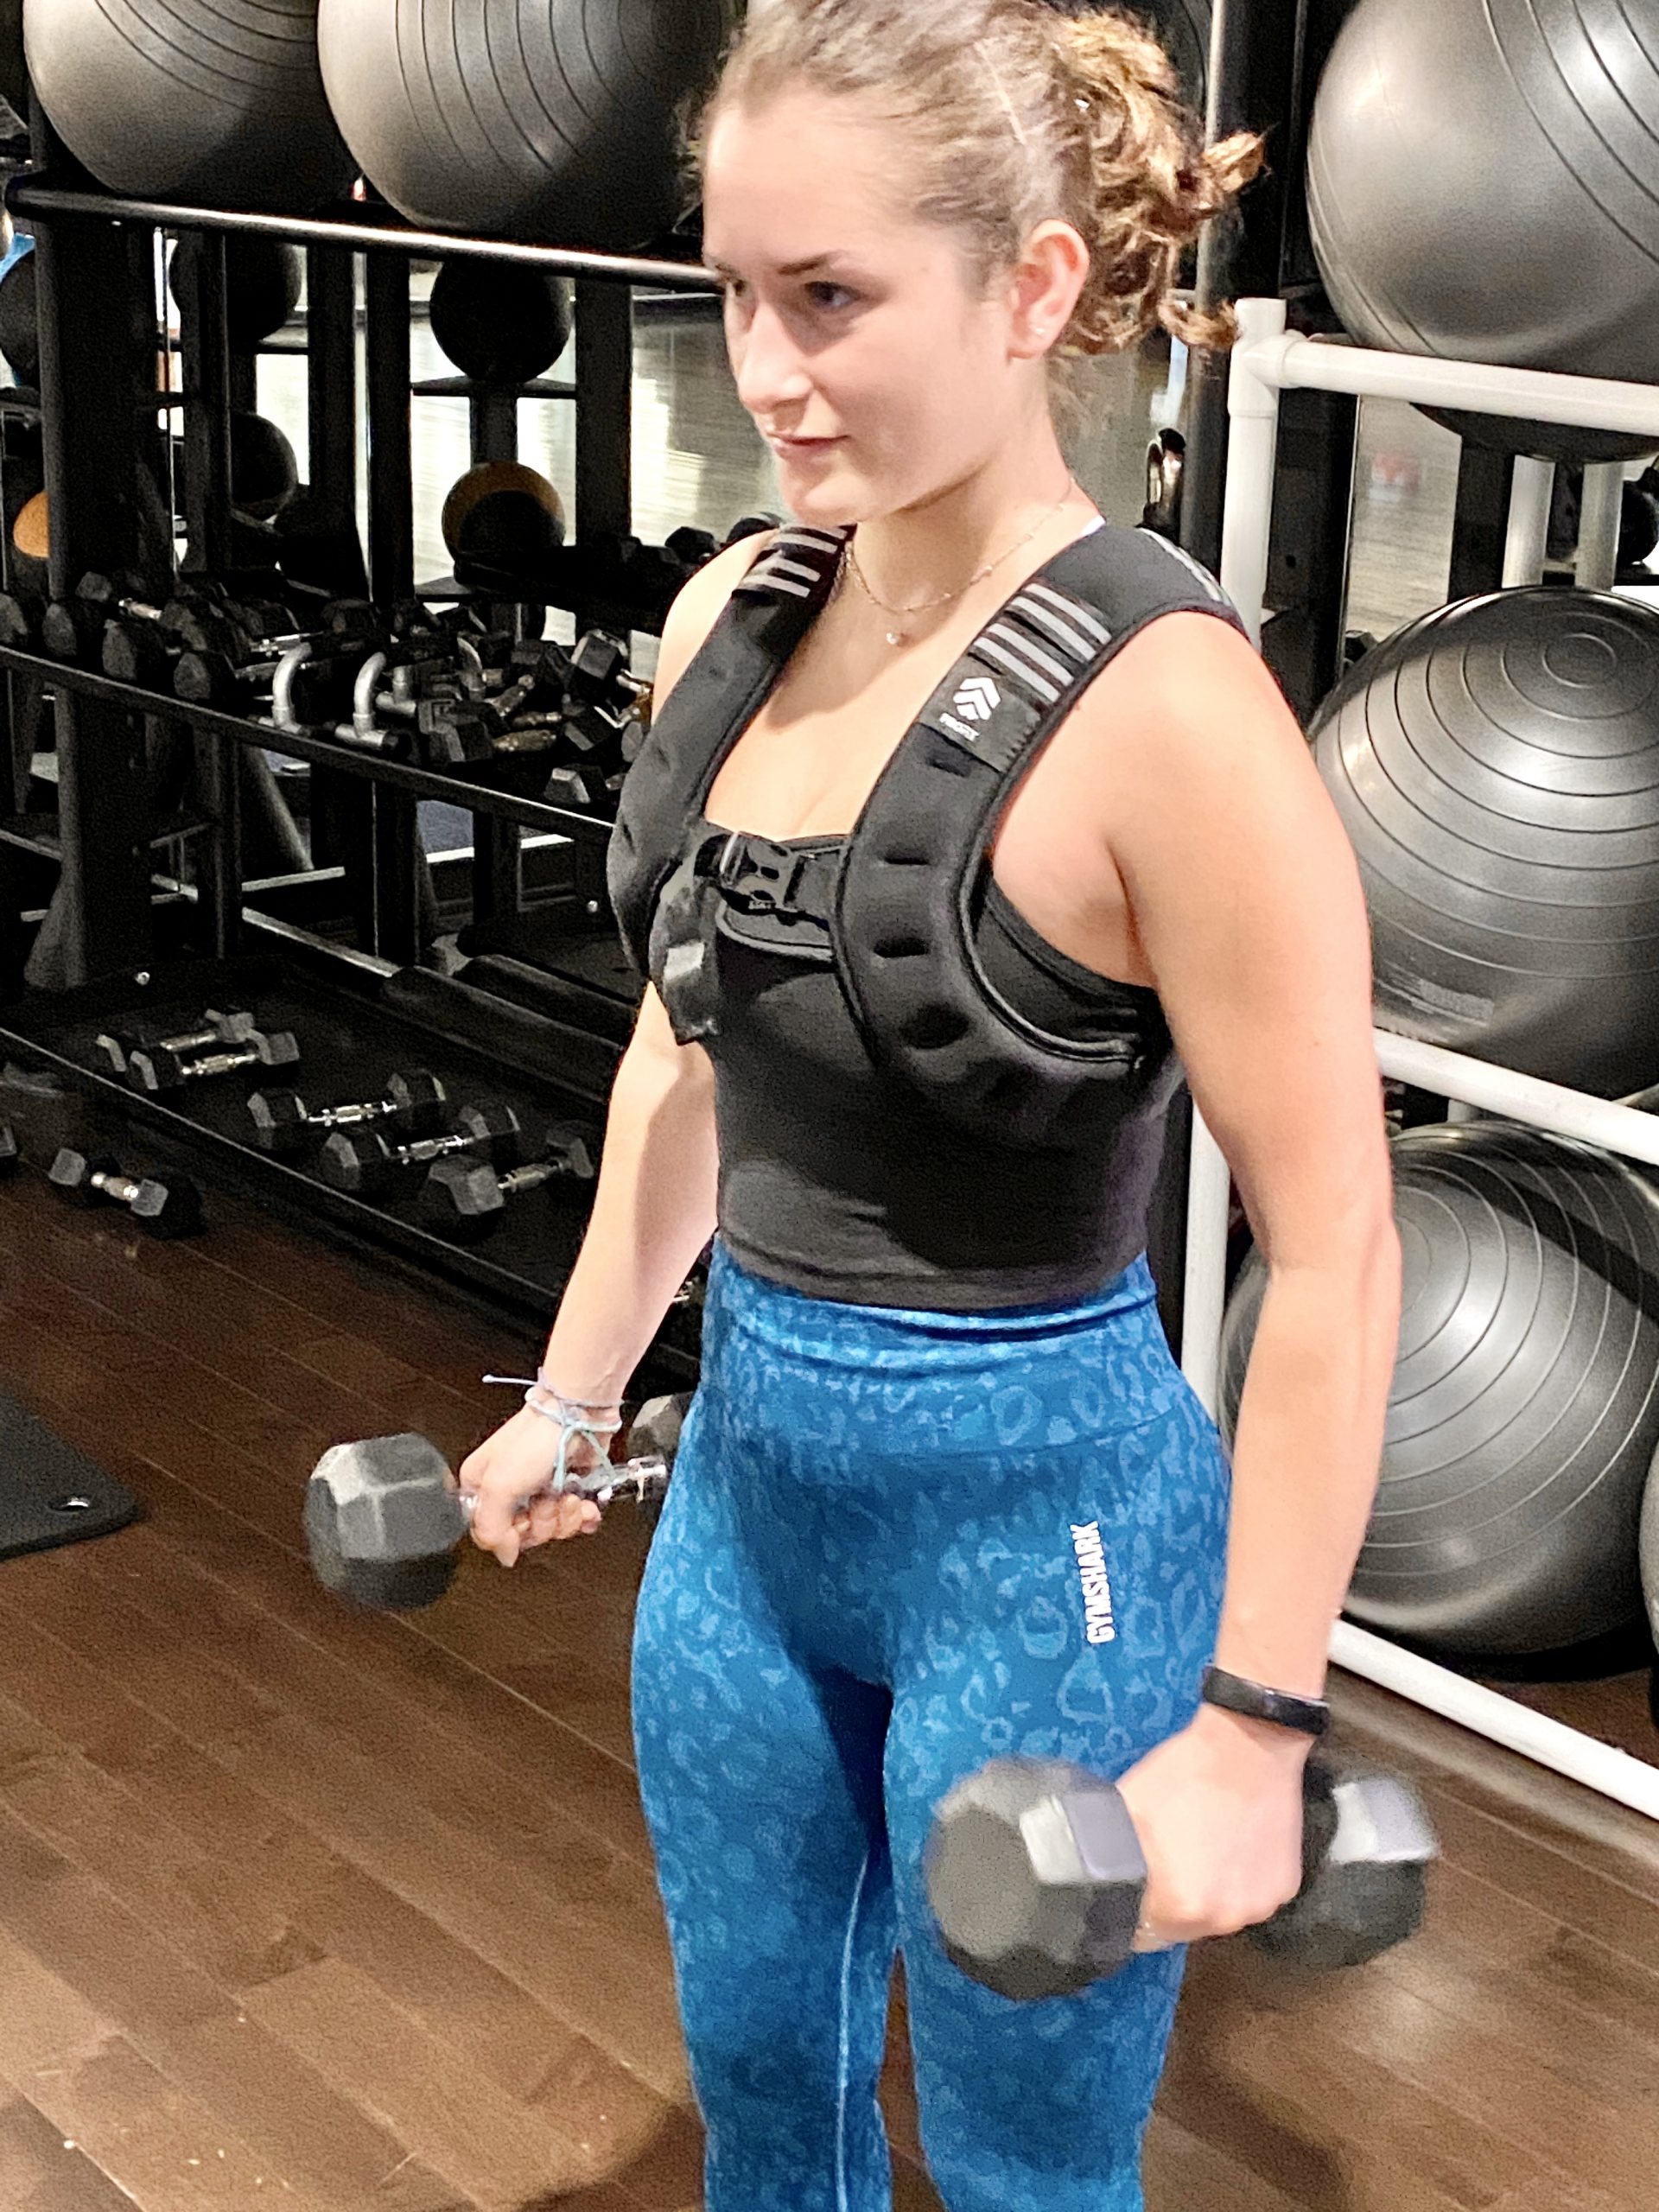 Adding Variance To Your Training With A Weighted Vest